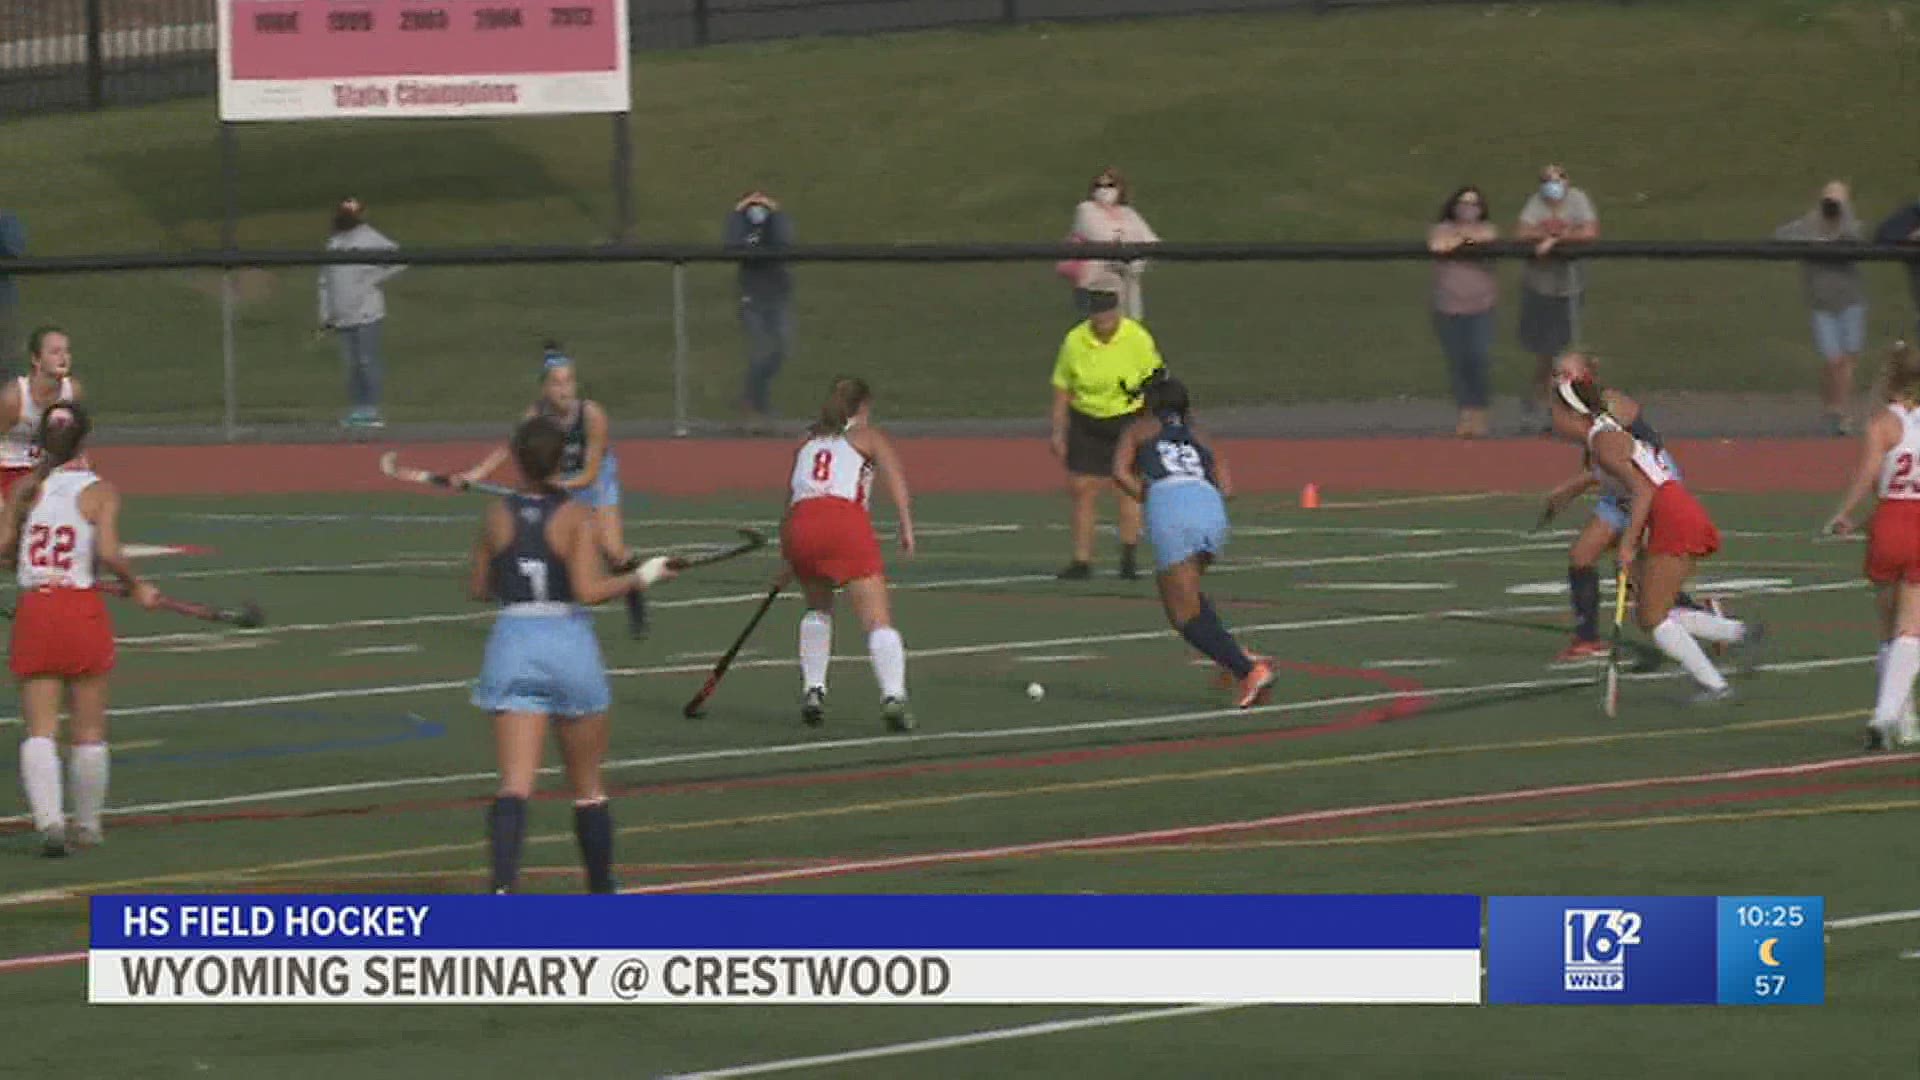 With Iowa recruit Mia Magnotta in goal, Wyoming Seminary blanked Crestwood 3-0 in girls HS soccer.